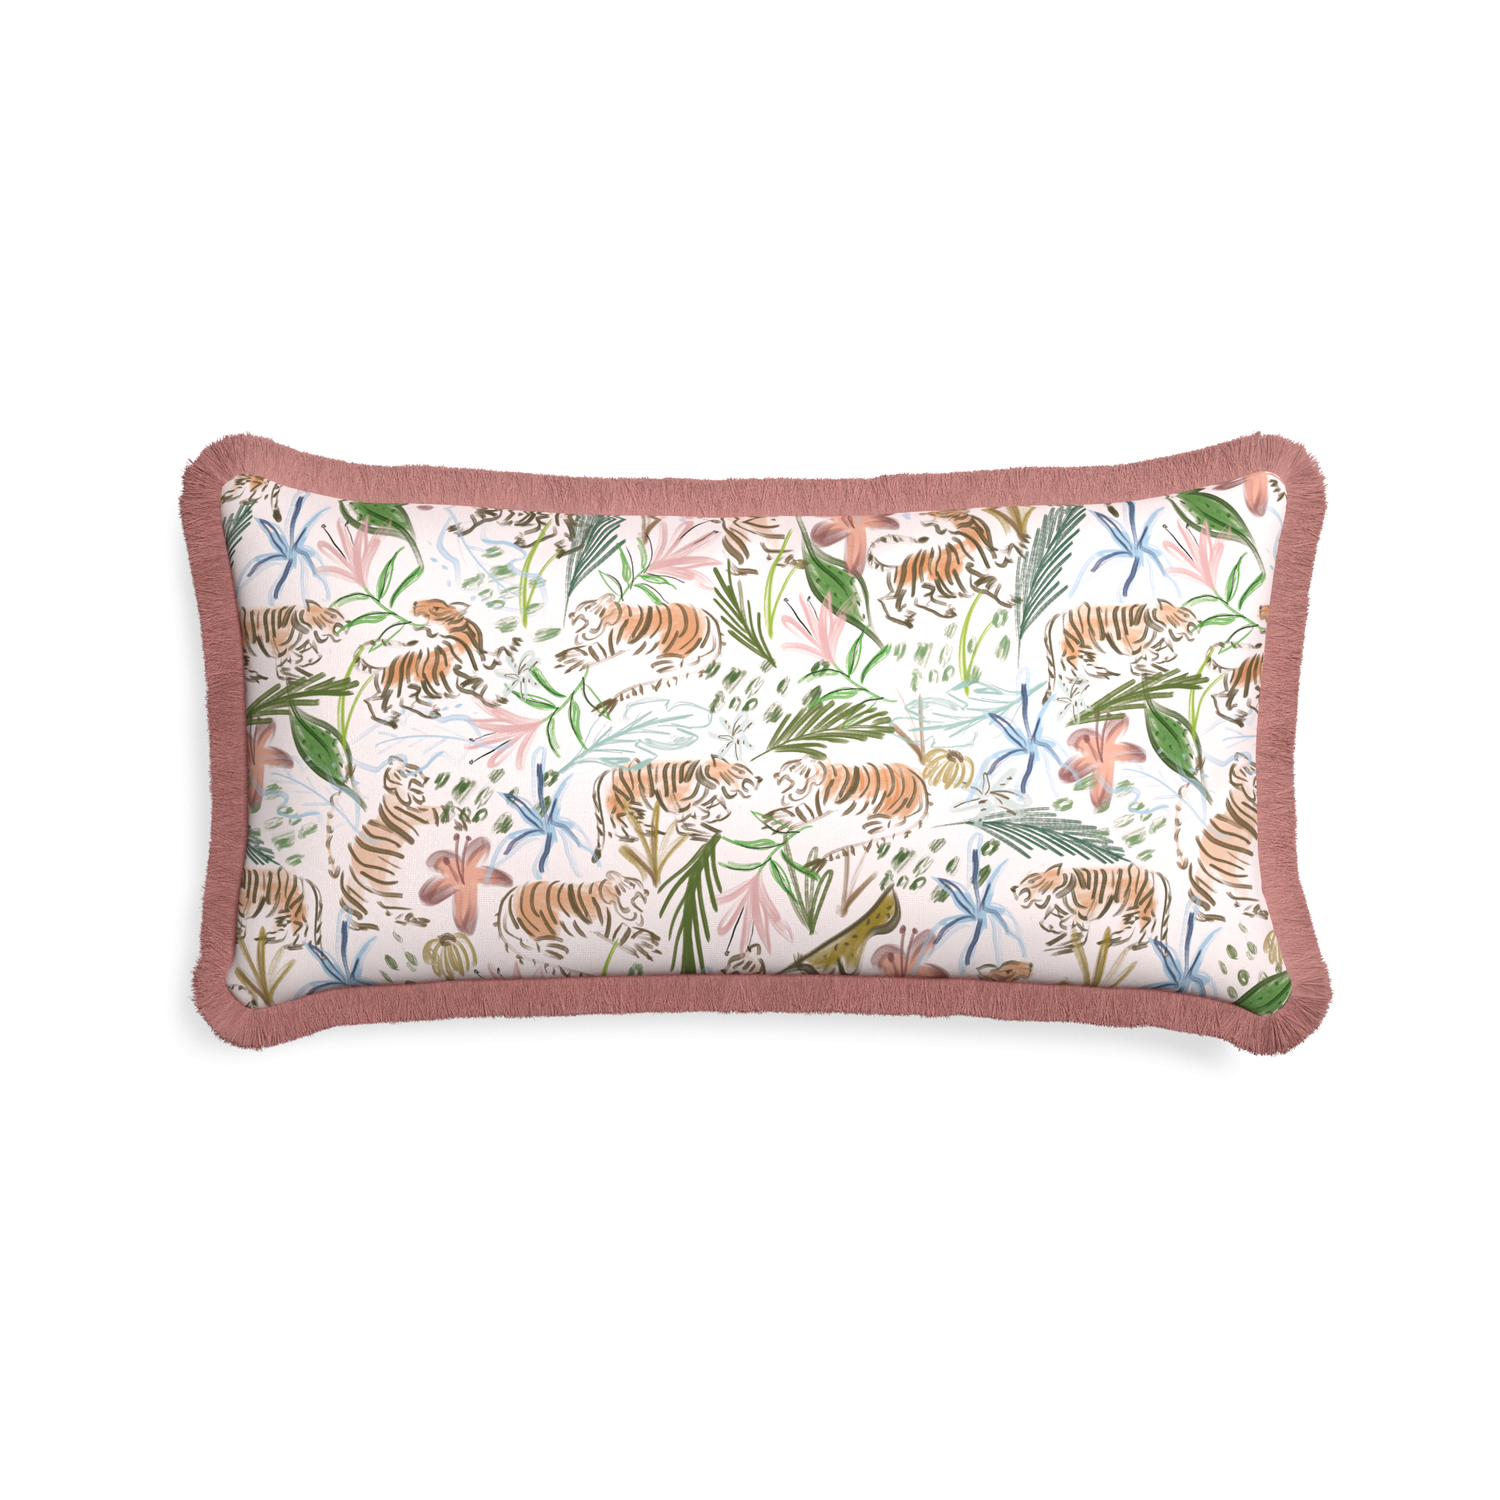 Midi-lumbar frida pink custom pink chinoiserie tigerpillow with d fringe on white background